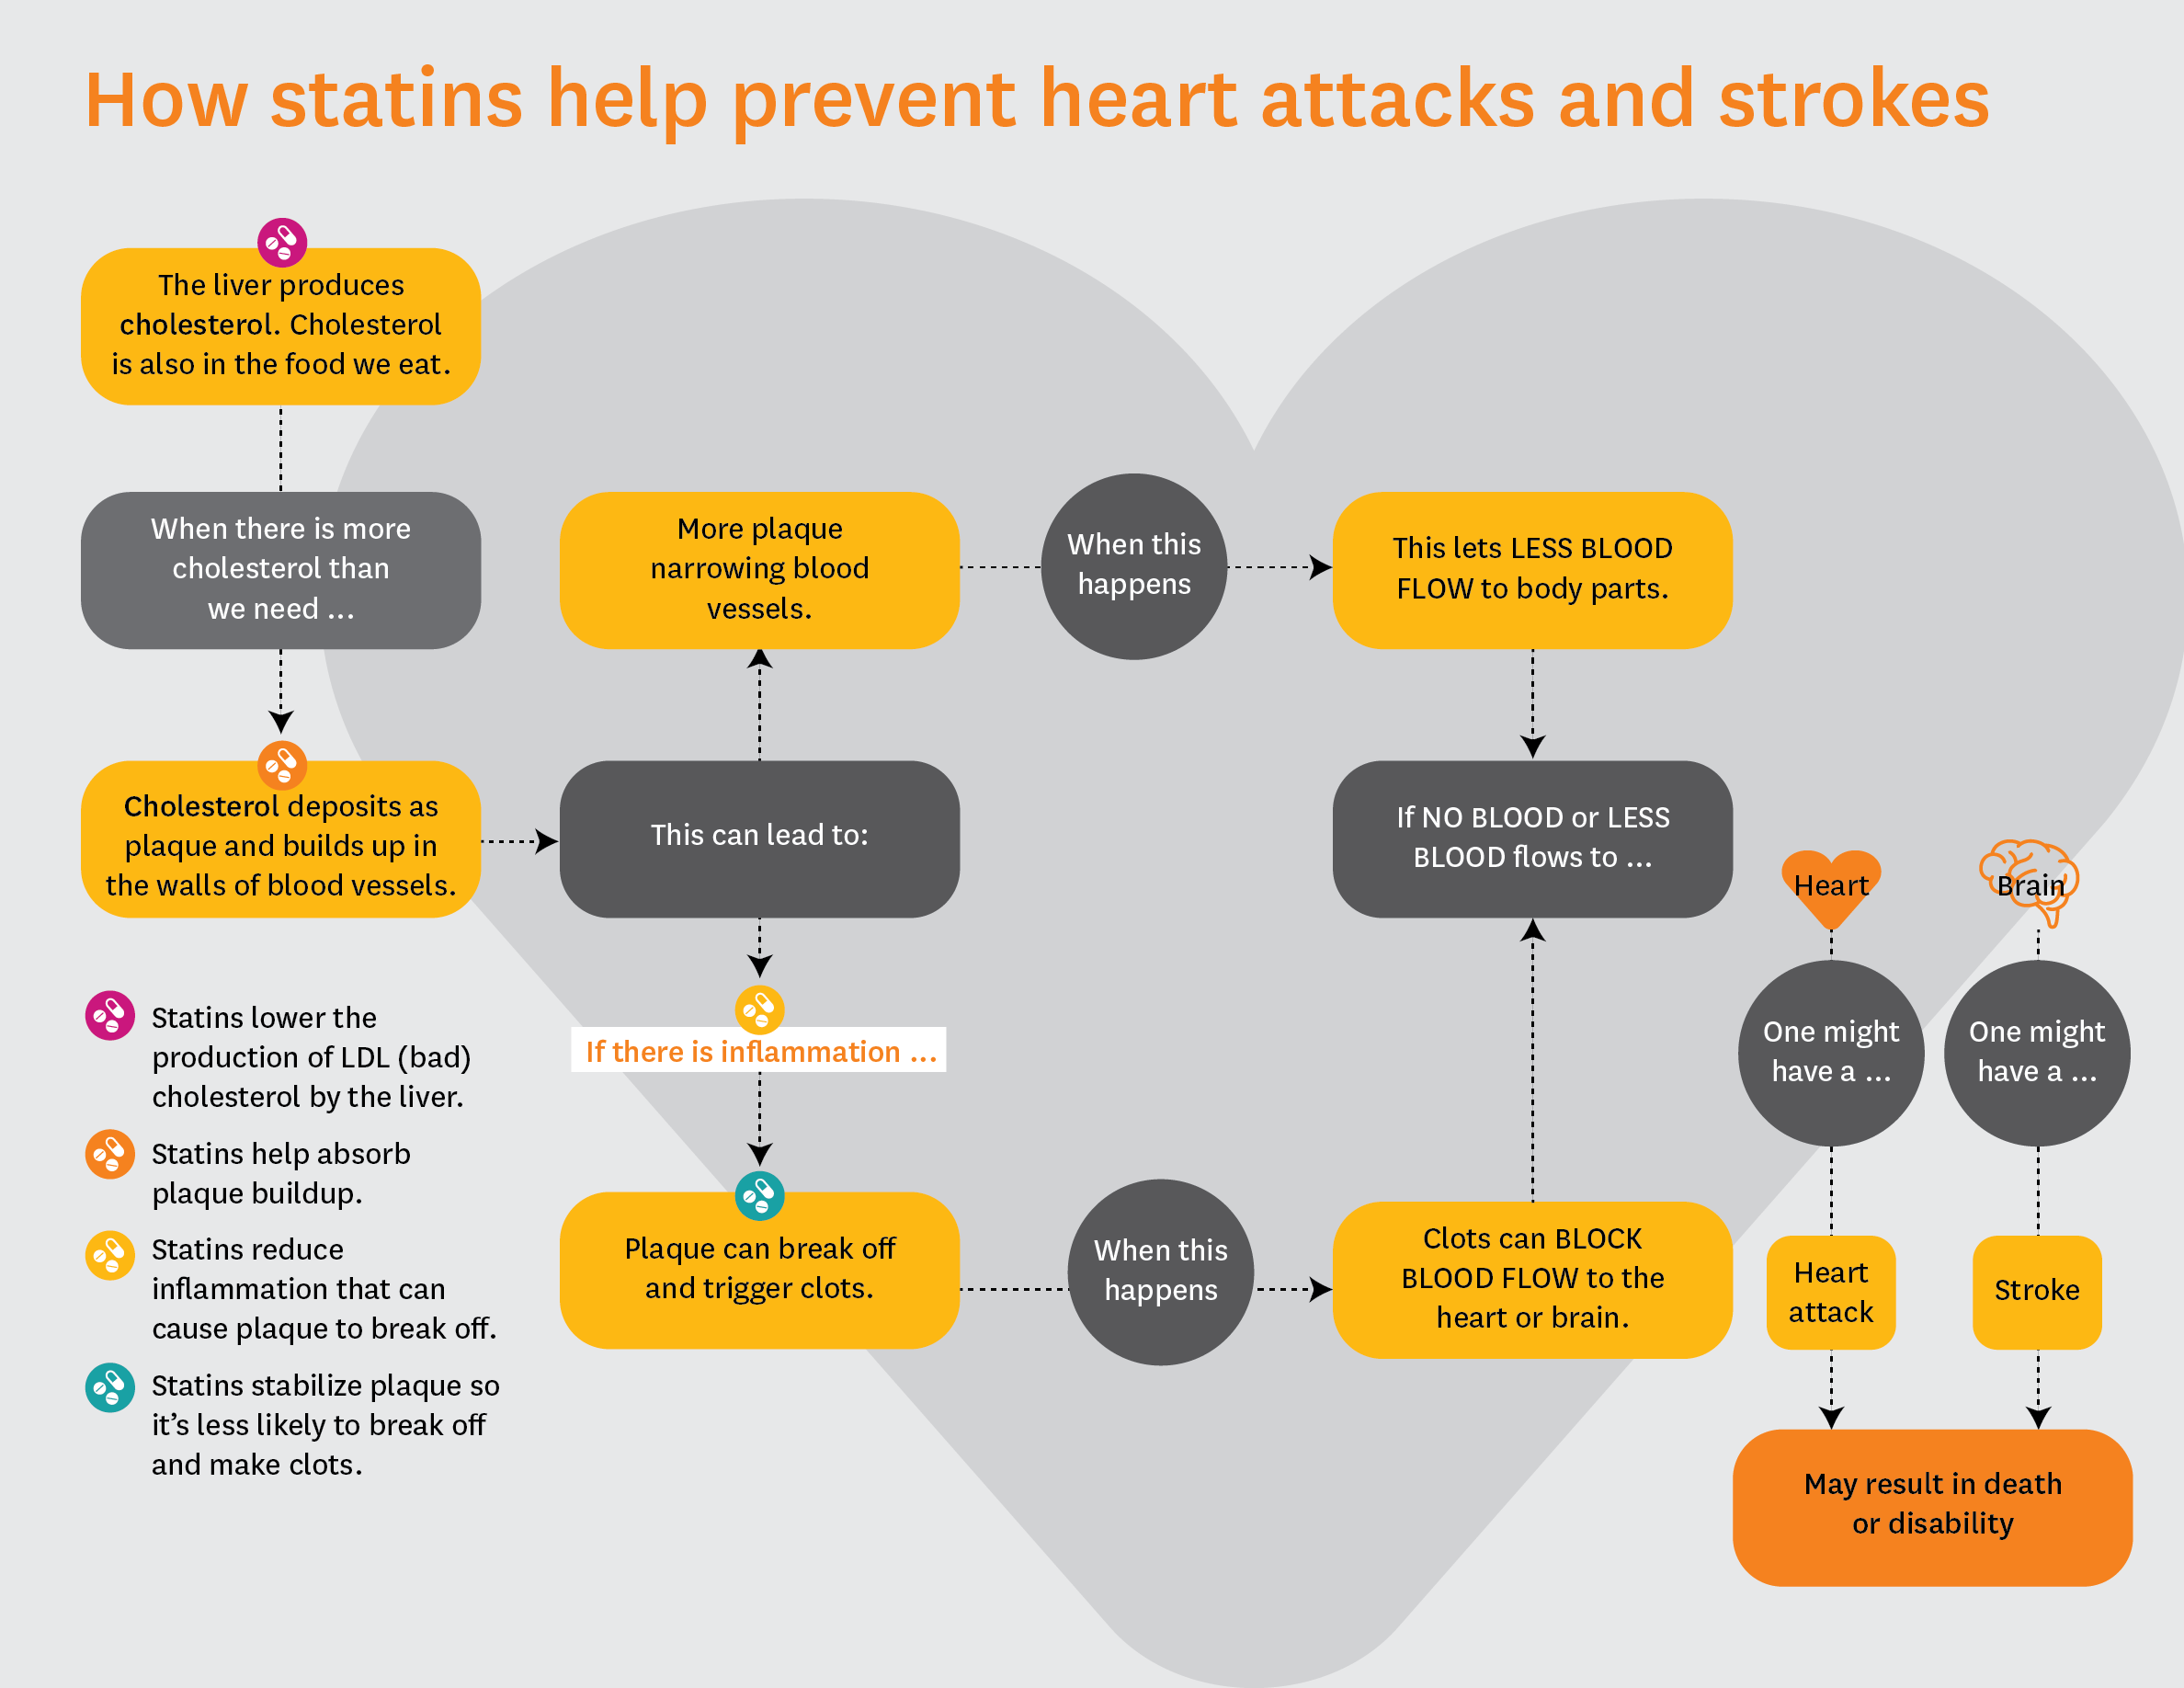 How statins help prevent heart attacks and strokes